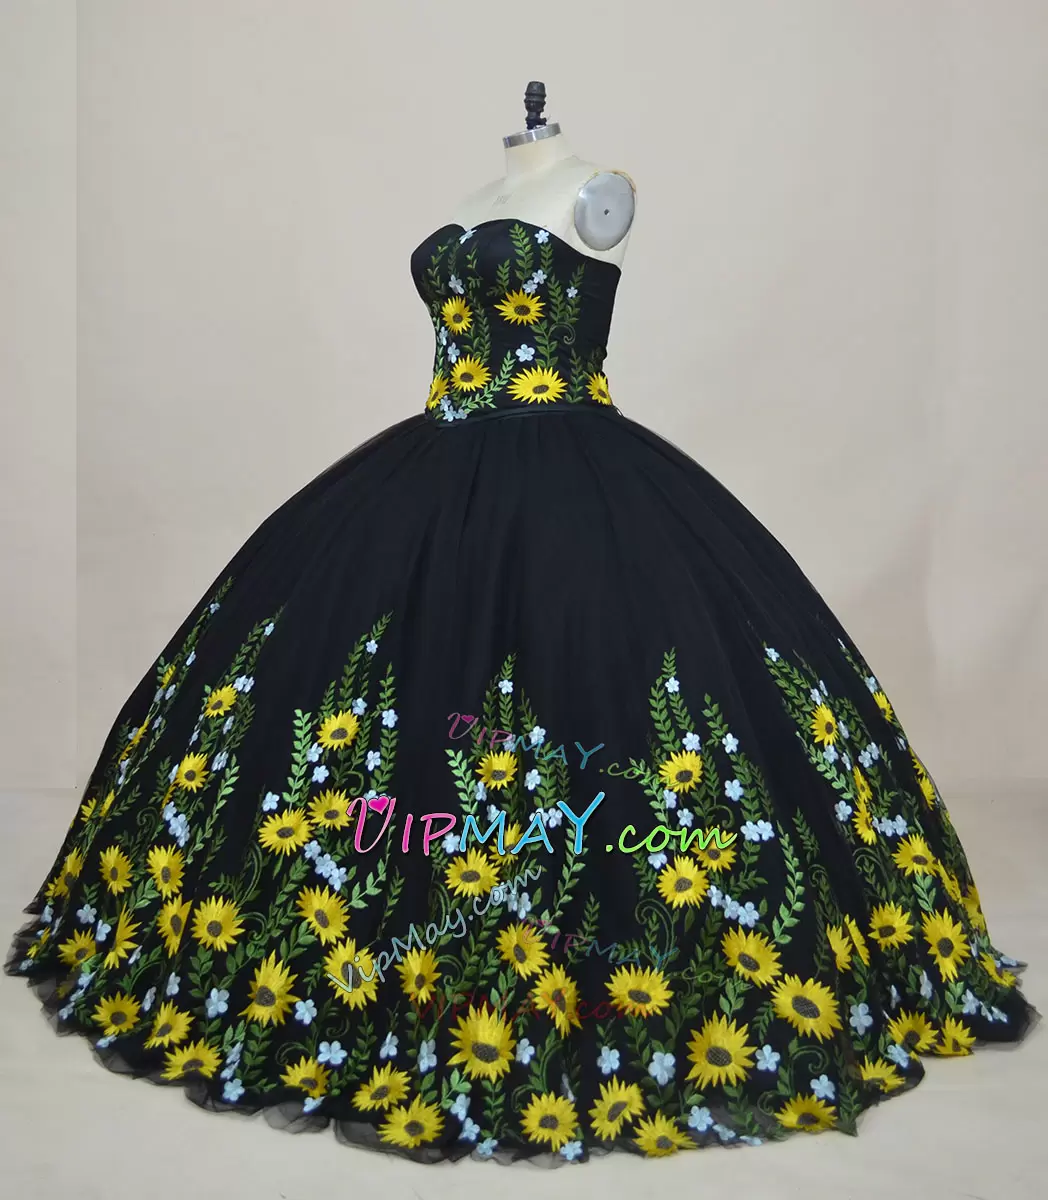 traditional quinceanera dress etsy,traditional mexican quinceanera dress,mexican charra quinceanera dress,mexican themed quinceanera dress,mexican quinceanera charro dress,mexican chiapas dress,sunflower quinceanera dress,embroidery quinceanera dress,floral embroidered quinceanera dress,black quincenanera dress,black charro quinceanera dress,black quinceanera dress,quinceanera dress that are really puffy,pretty puffy quinceanera dress,